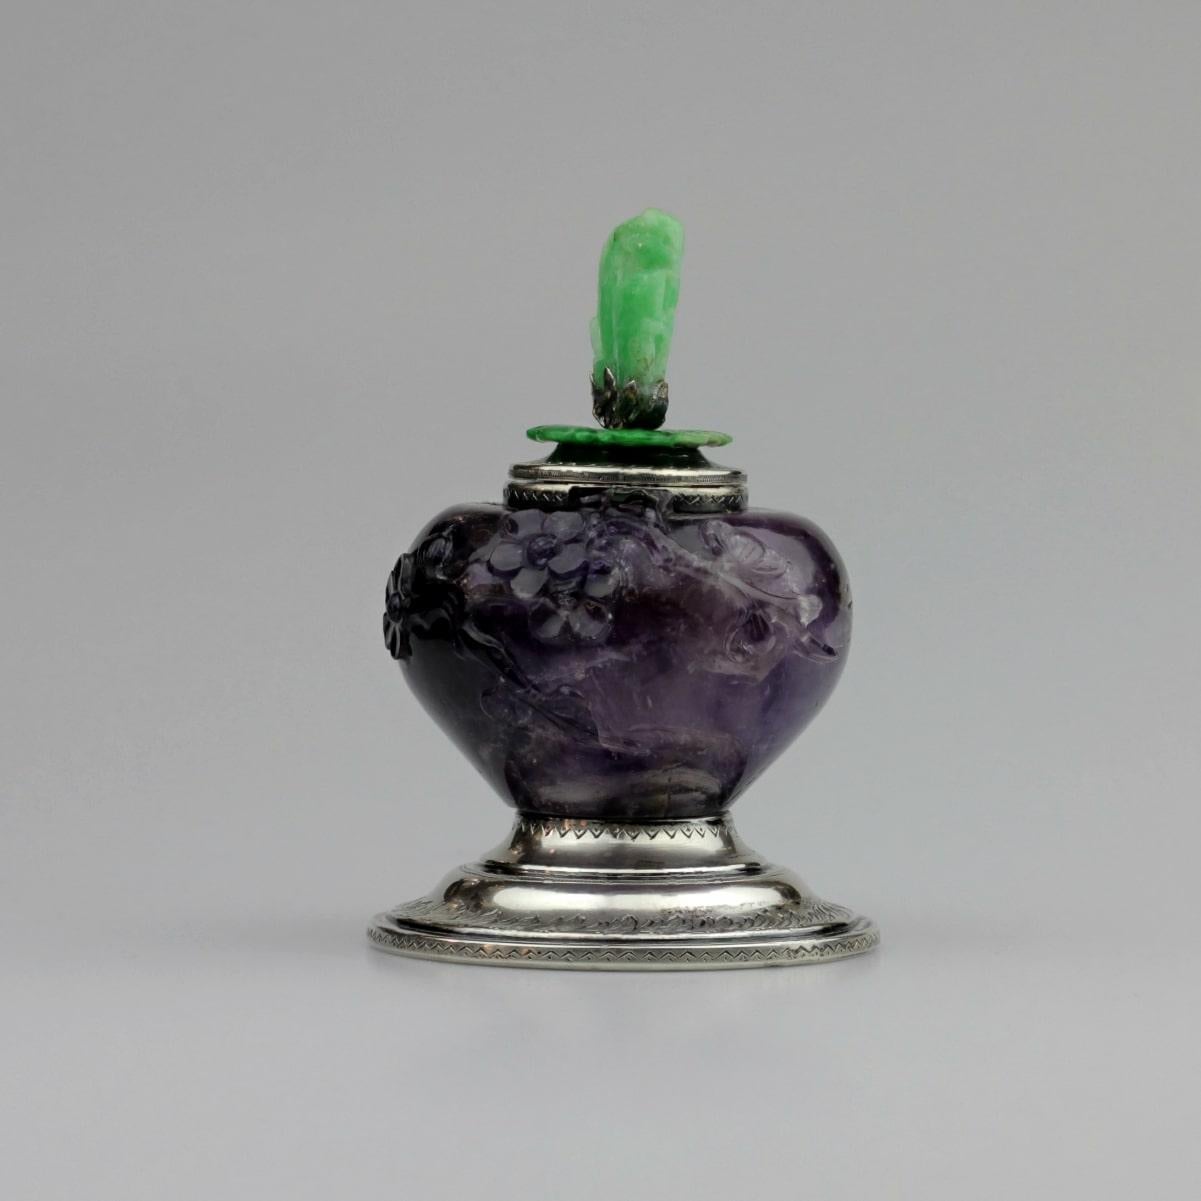 An incredible decorative inkwell by New York identity, Edward I. Farmer. The piece is crafted from a large piece of amethyst in a carved prunus pattern topped with a jadeite finial, all mounted in sterling silver. The silver foot on this piece is